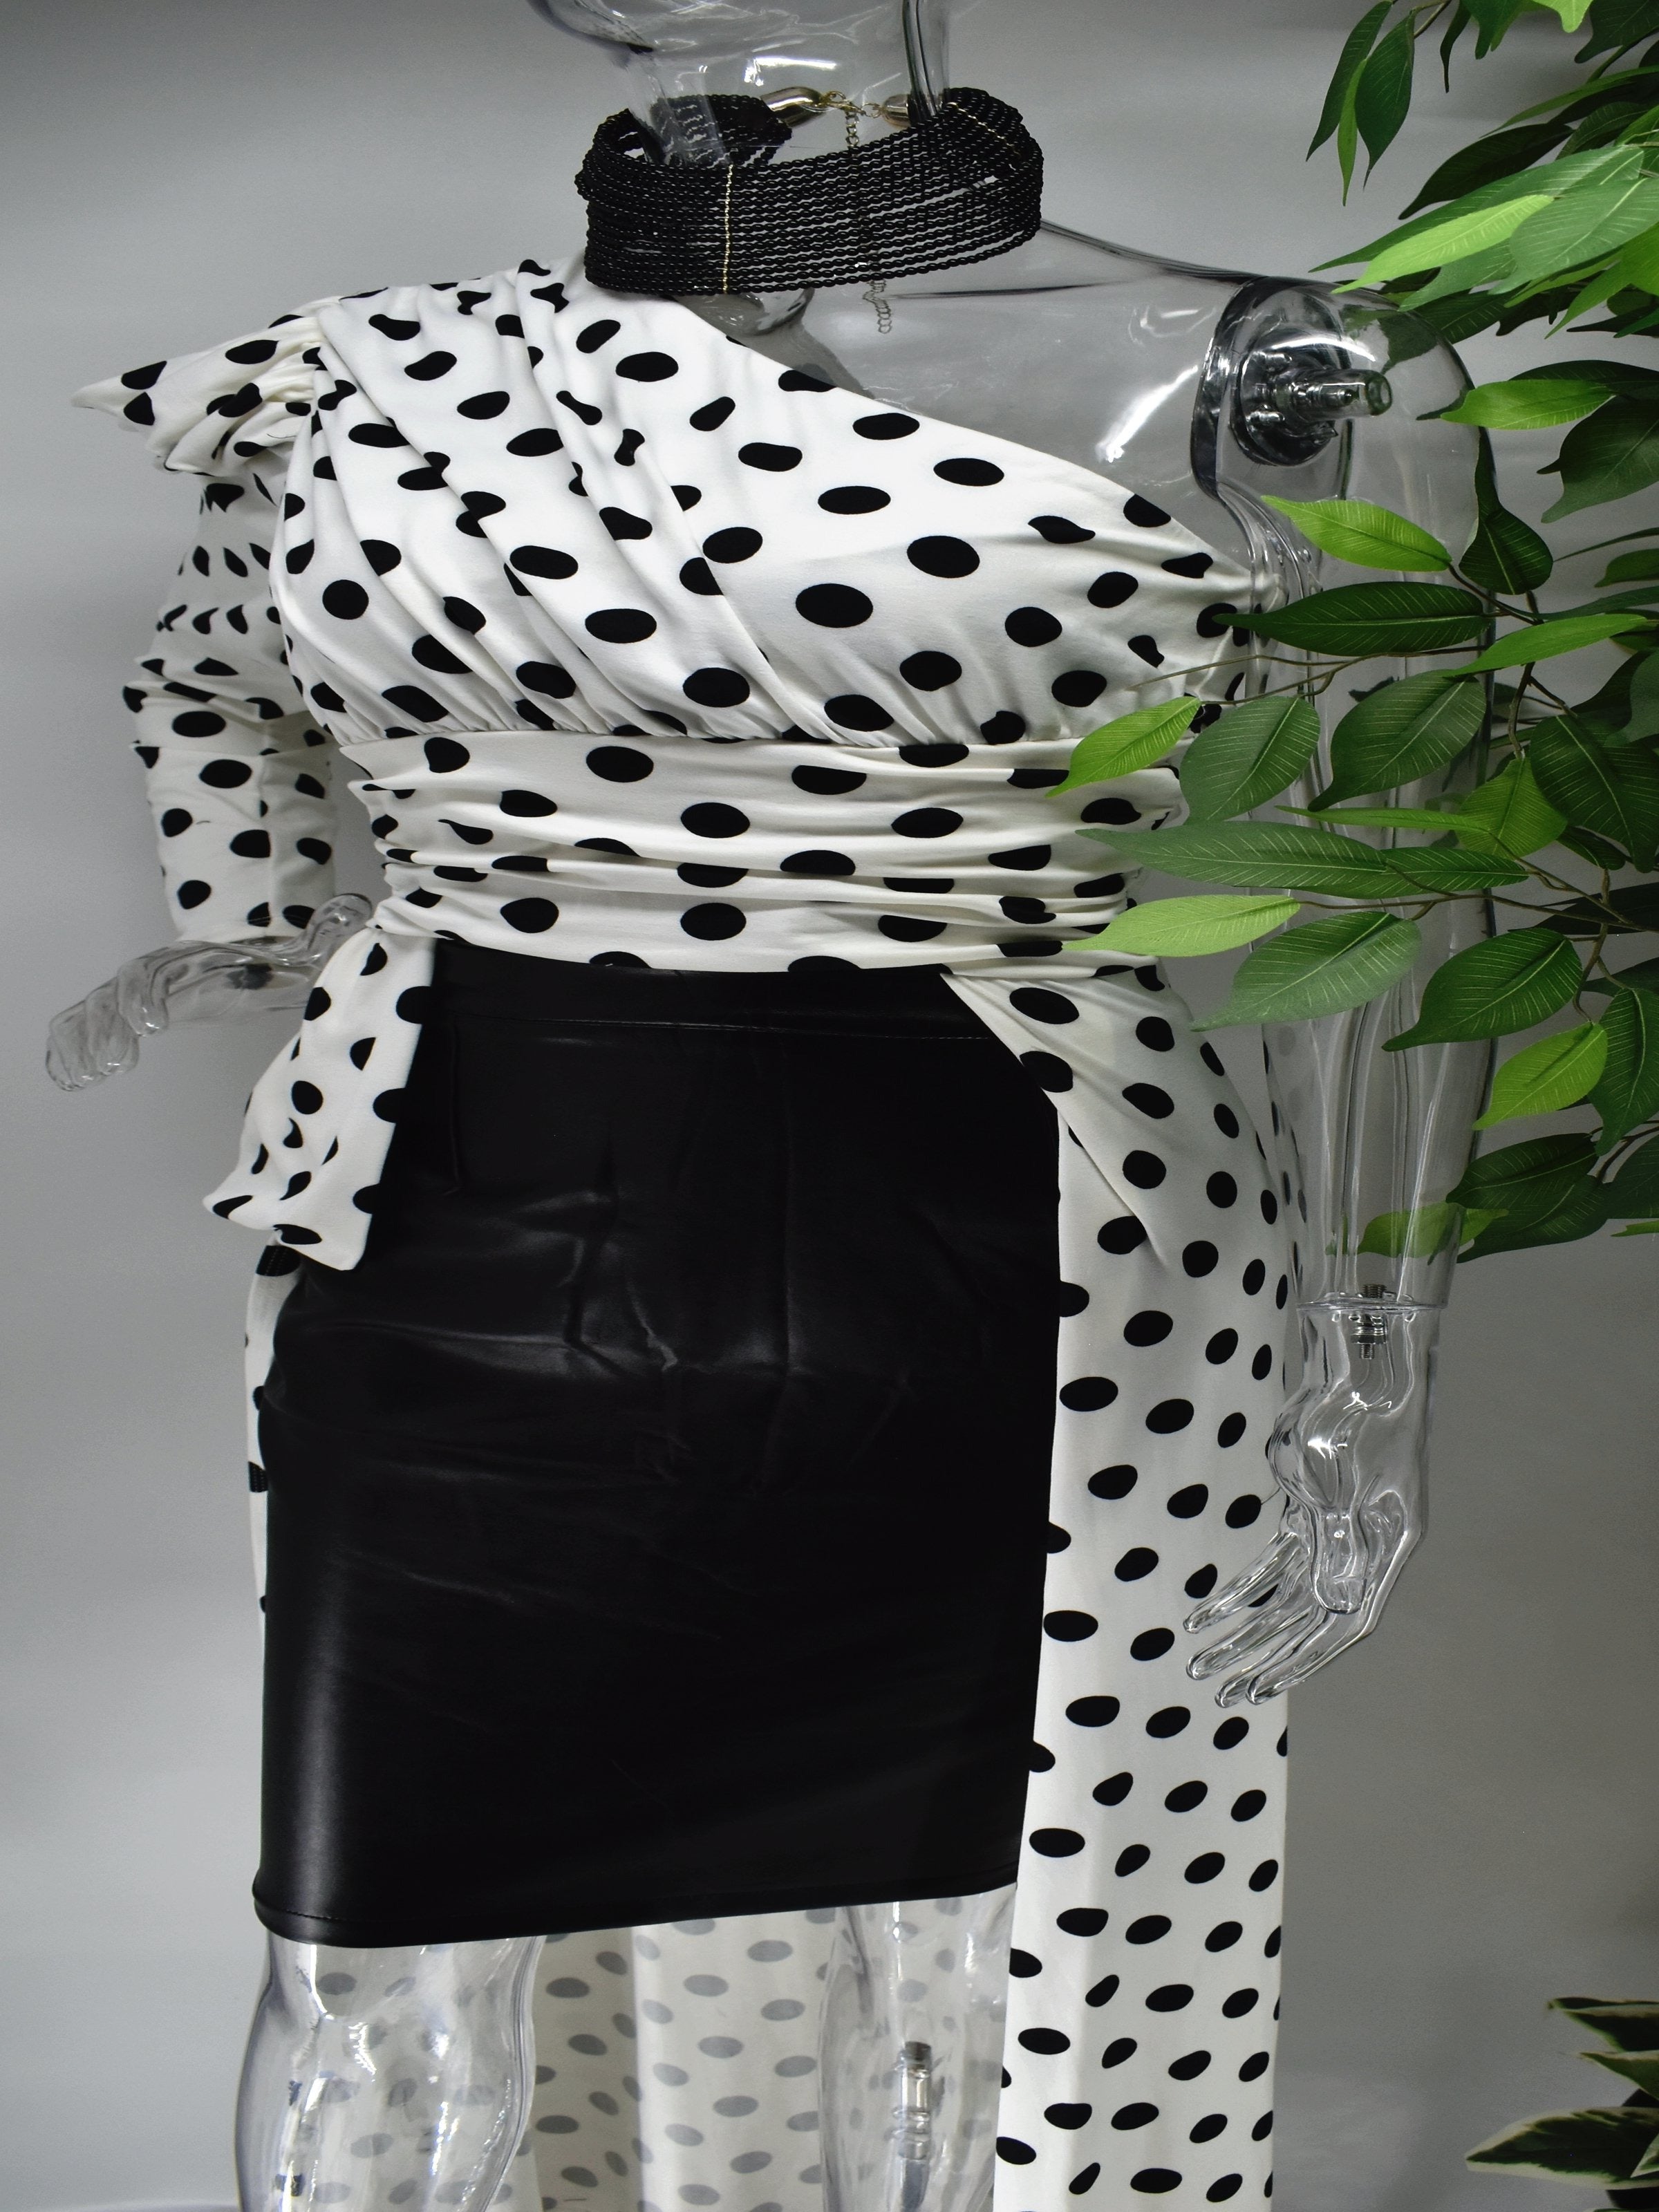 Let's go out and get Jiggy in our Biddy white with black polka dot top. Biddy's unique one sleeved asymmetrical design is complimented with a short and long hem. This top would be great paired with skirts, pants leggings or shorts.